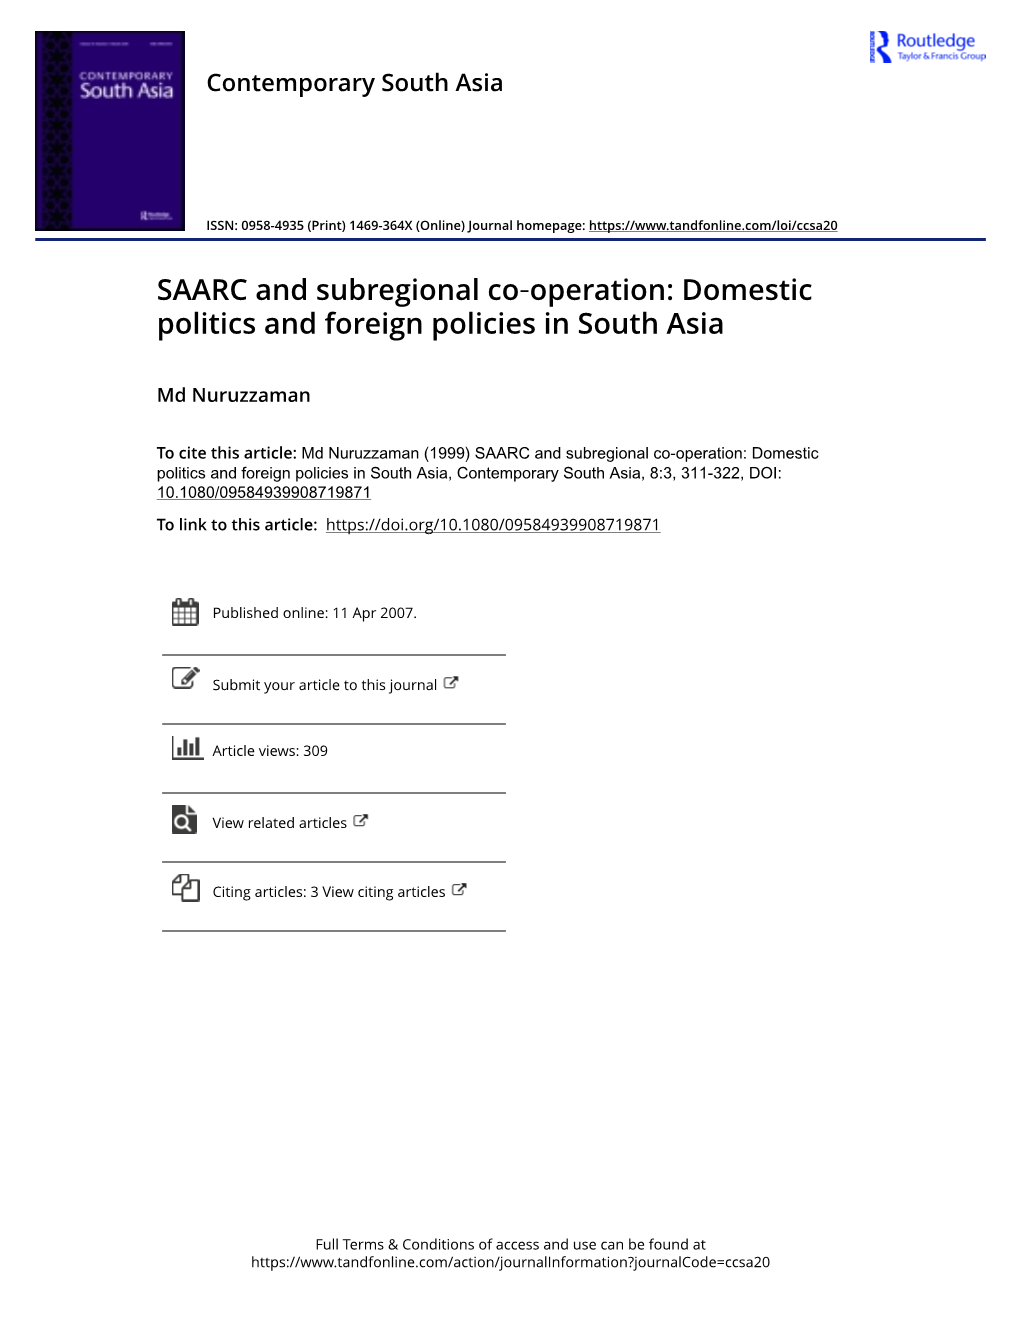 SAARC and Subregional Co‐Operation: Domestic Politics and Foreign Policies in South Asia